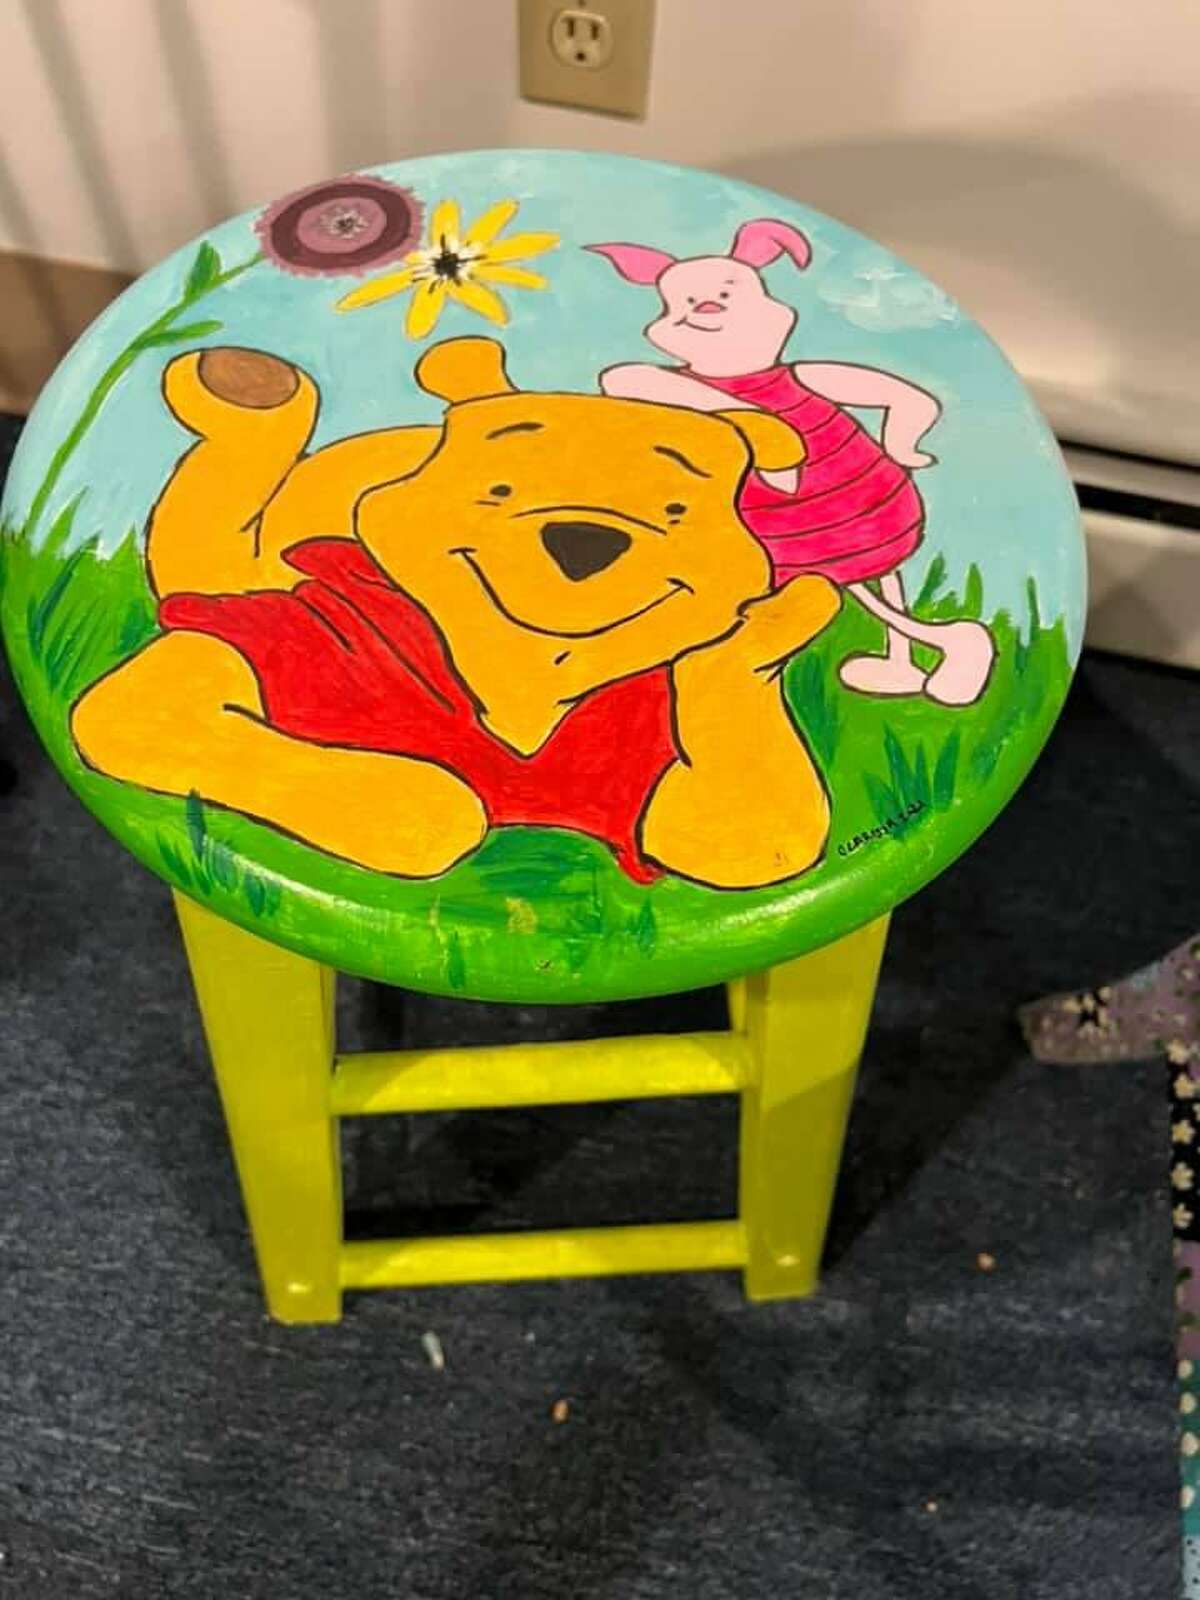 A chair made into a work of art to be auctioned at Friendly Hands Food Bank’s upcoming fundraiser, “A Seat at Our Table” Nov. 5.